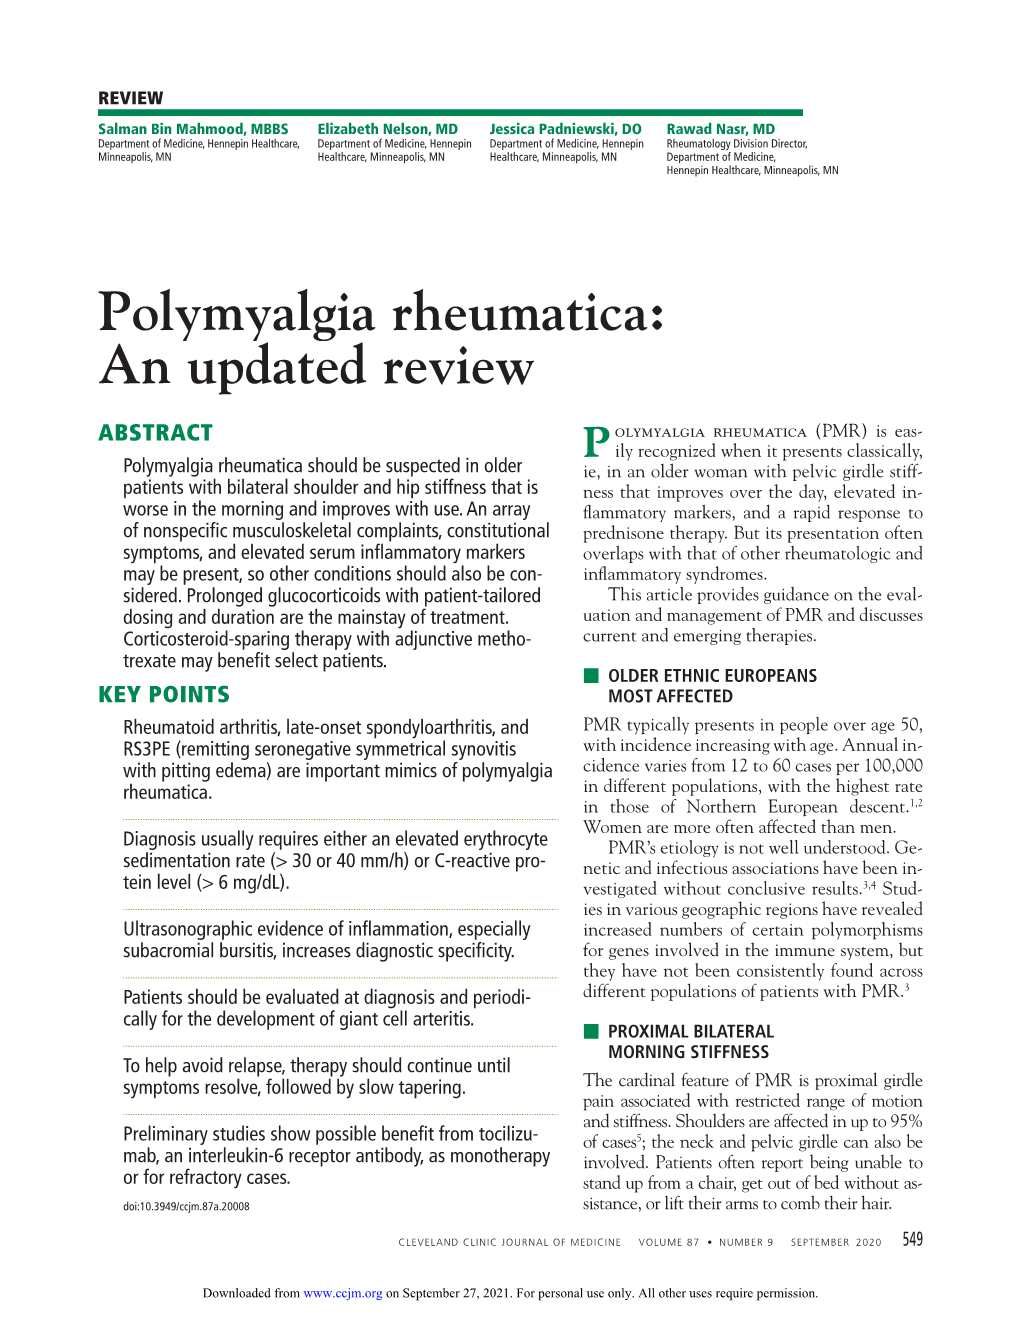 Polymyalgia Rheumatica: an Updated Review